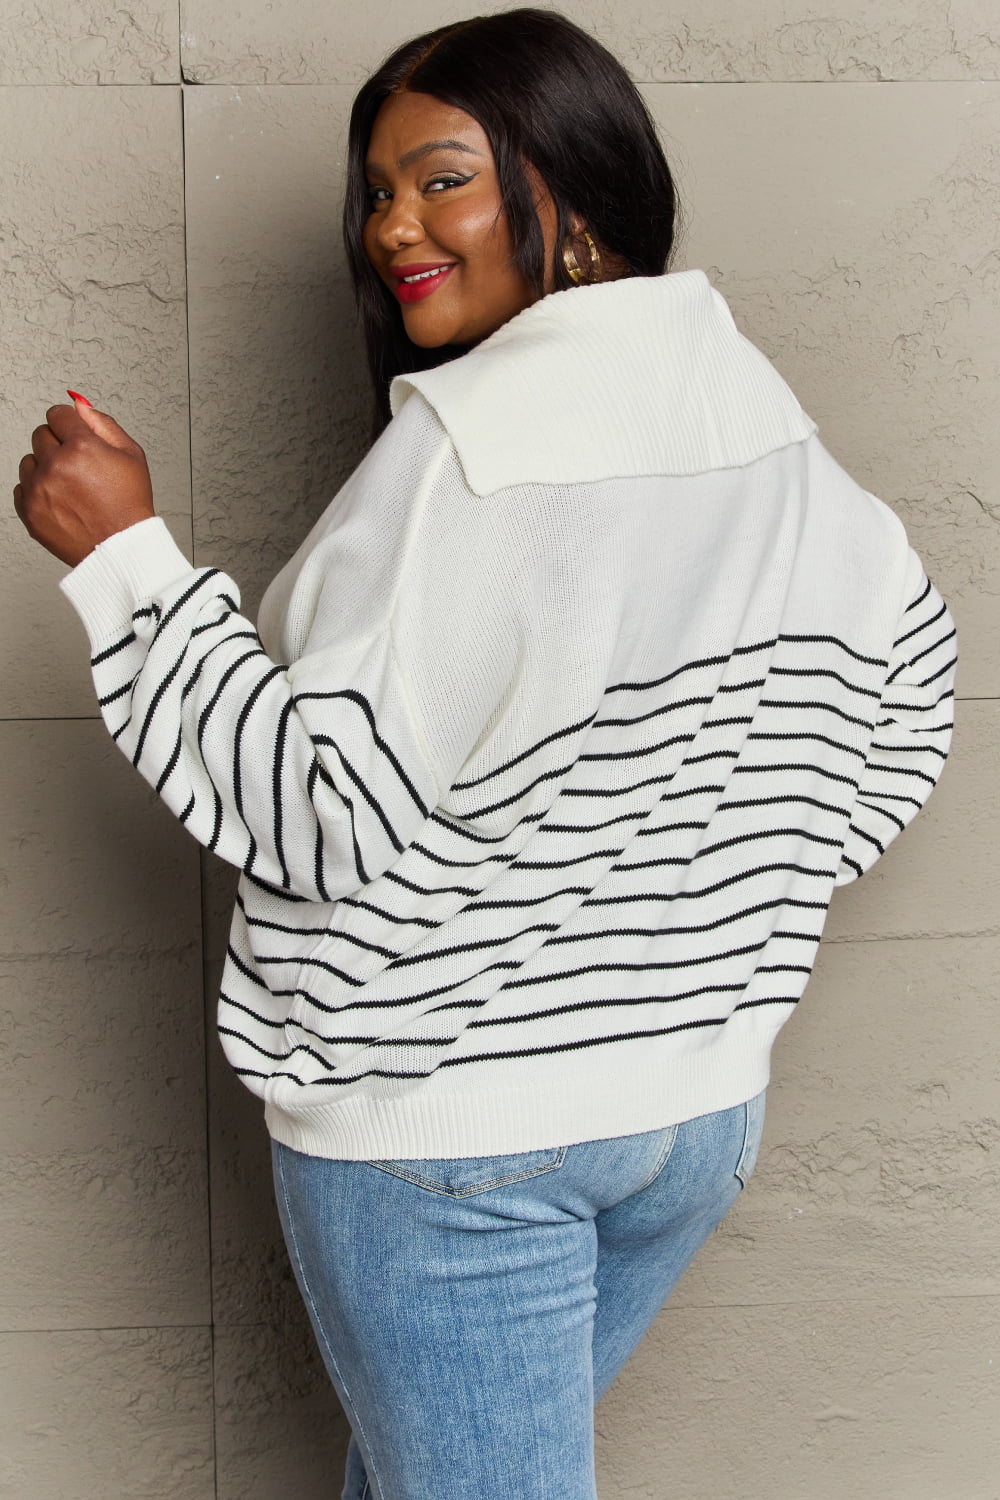 Sew In Love Make Me Smile Striped Oversized Knit Top - Mulberry Skies